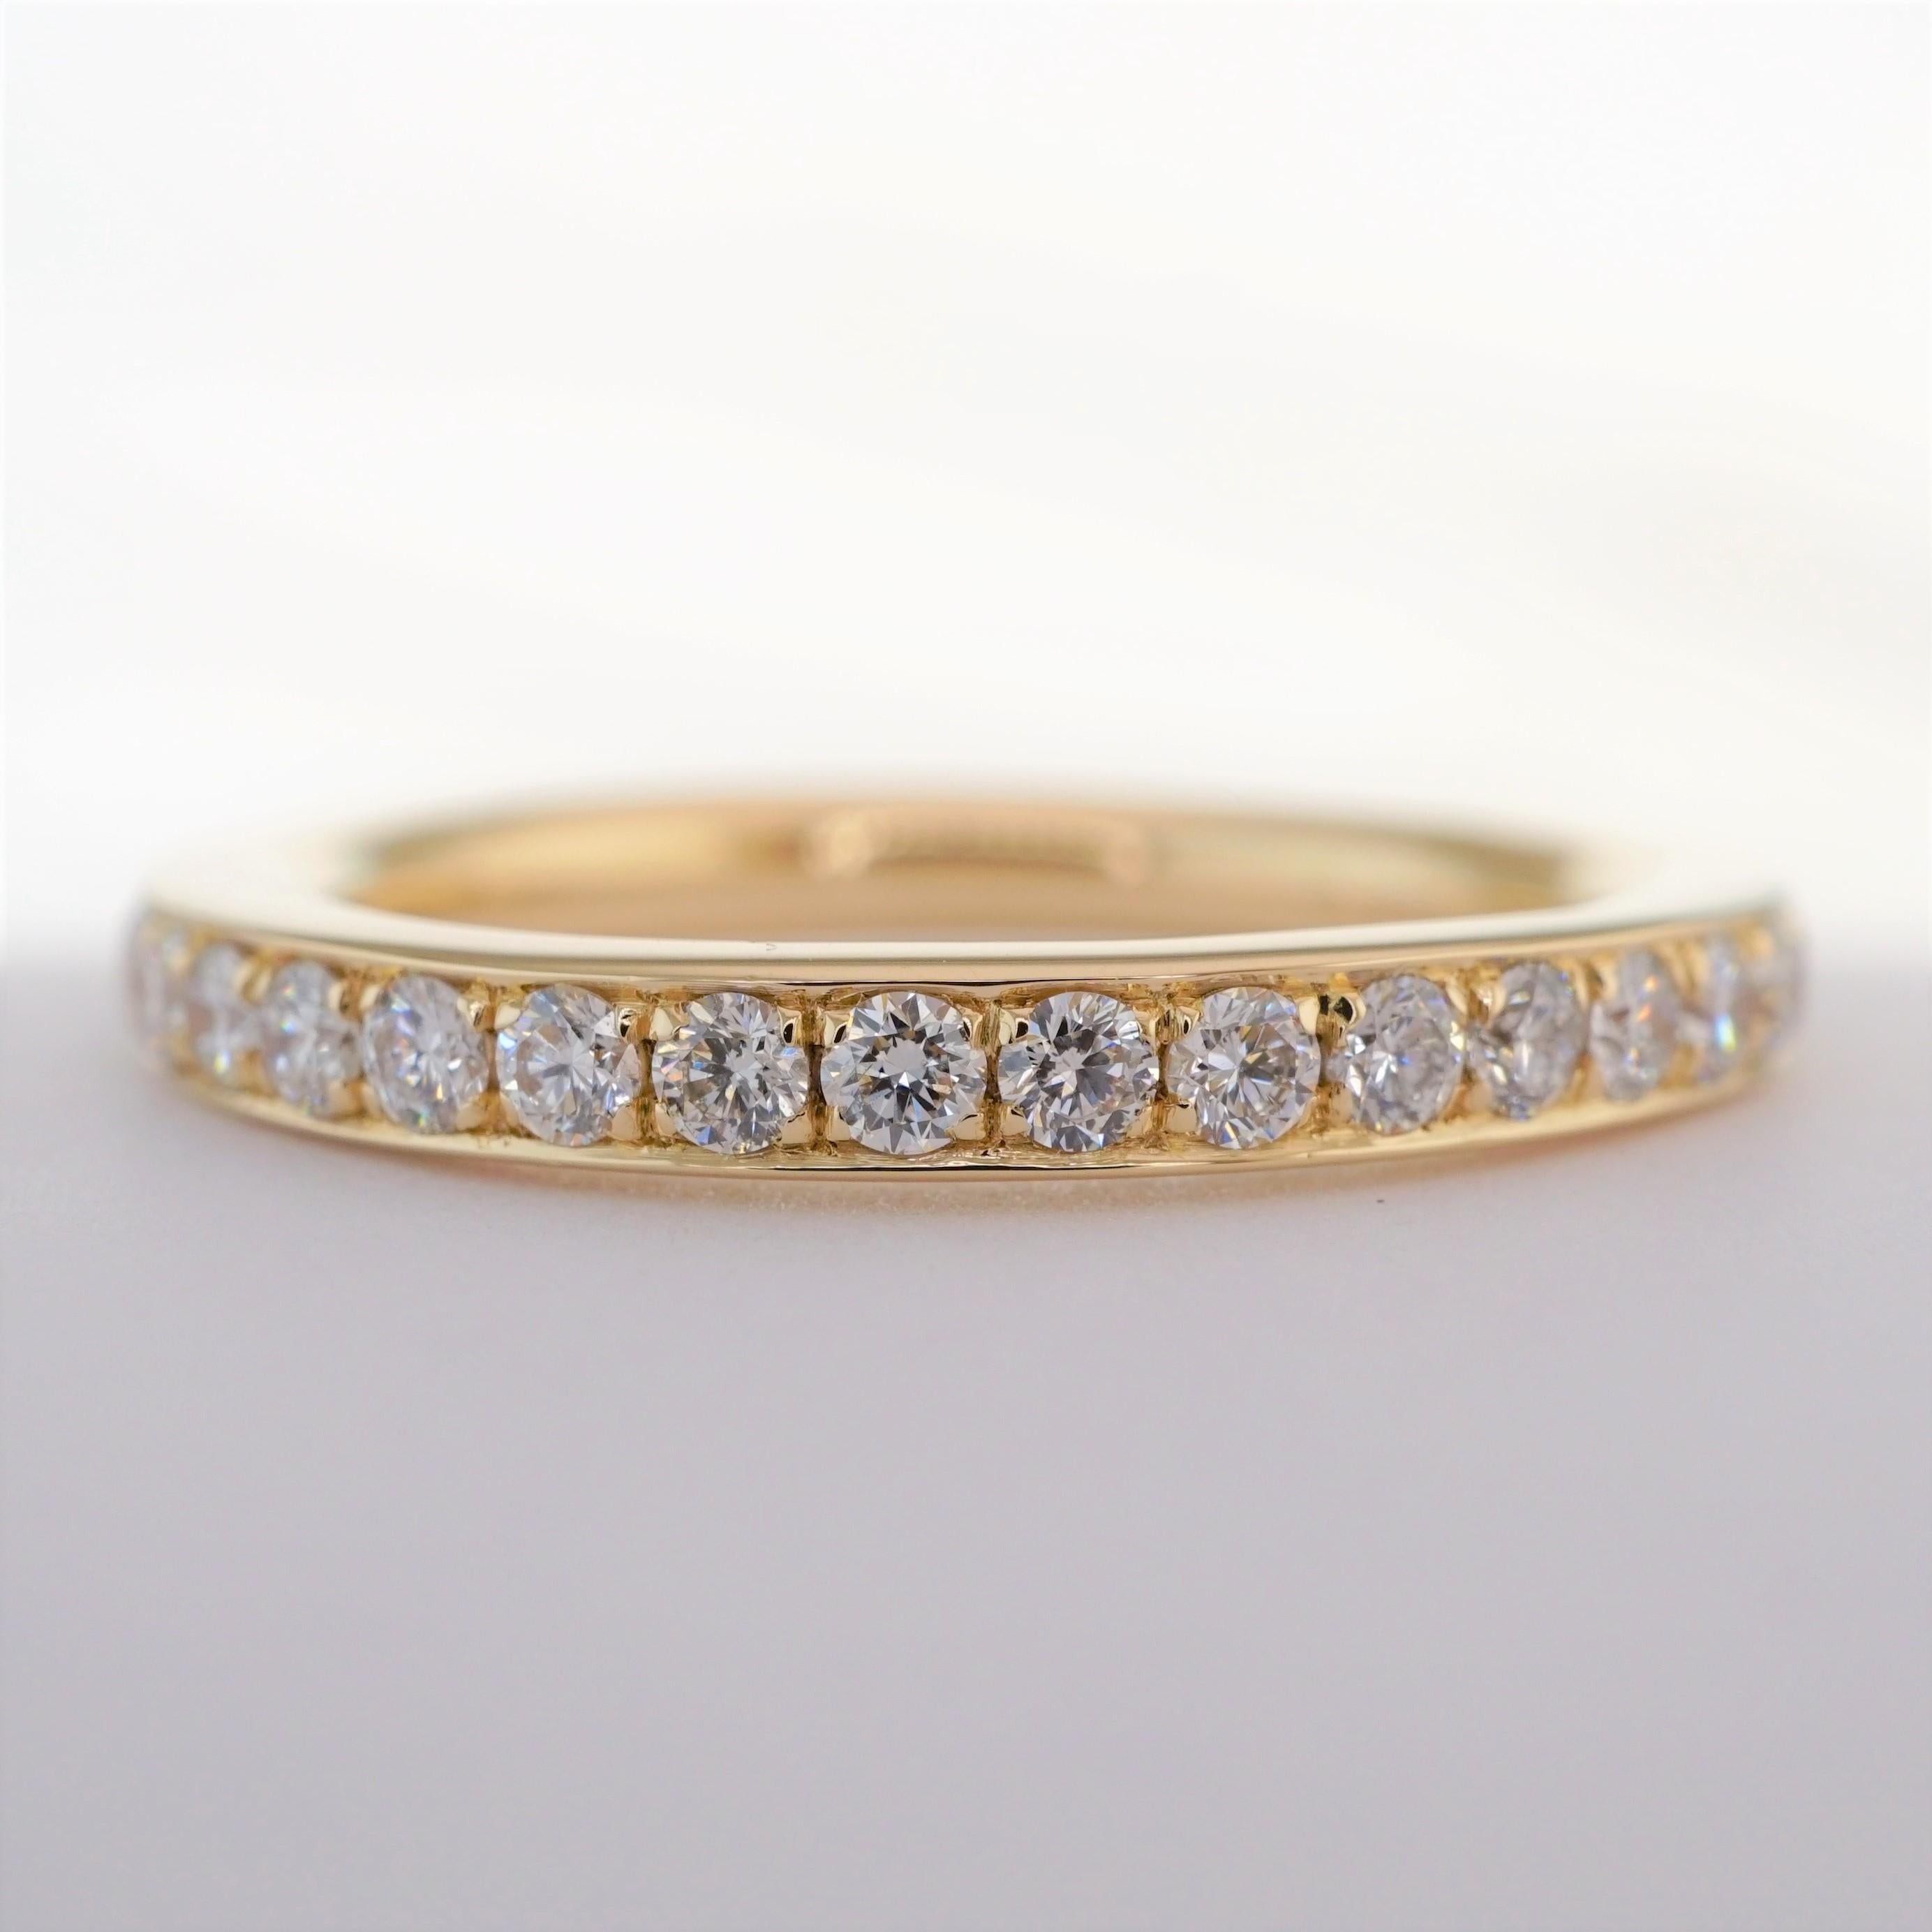 Diamond Eternity Band set in 18K Yellow gold. Pave set brilliant round diamonds are F-G VS2. Carat weight: .78 ct. Total ring weight: 3.30 grams. Ring size: 5.5. Can be sized upon request. This ring is customizable, price may vary depending on